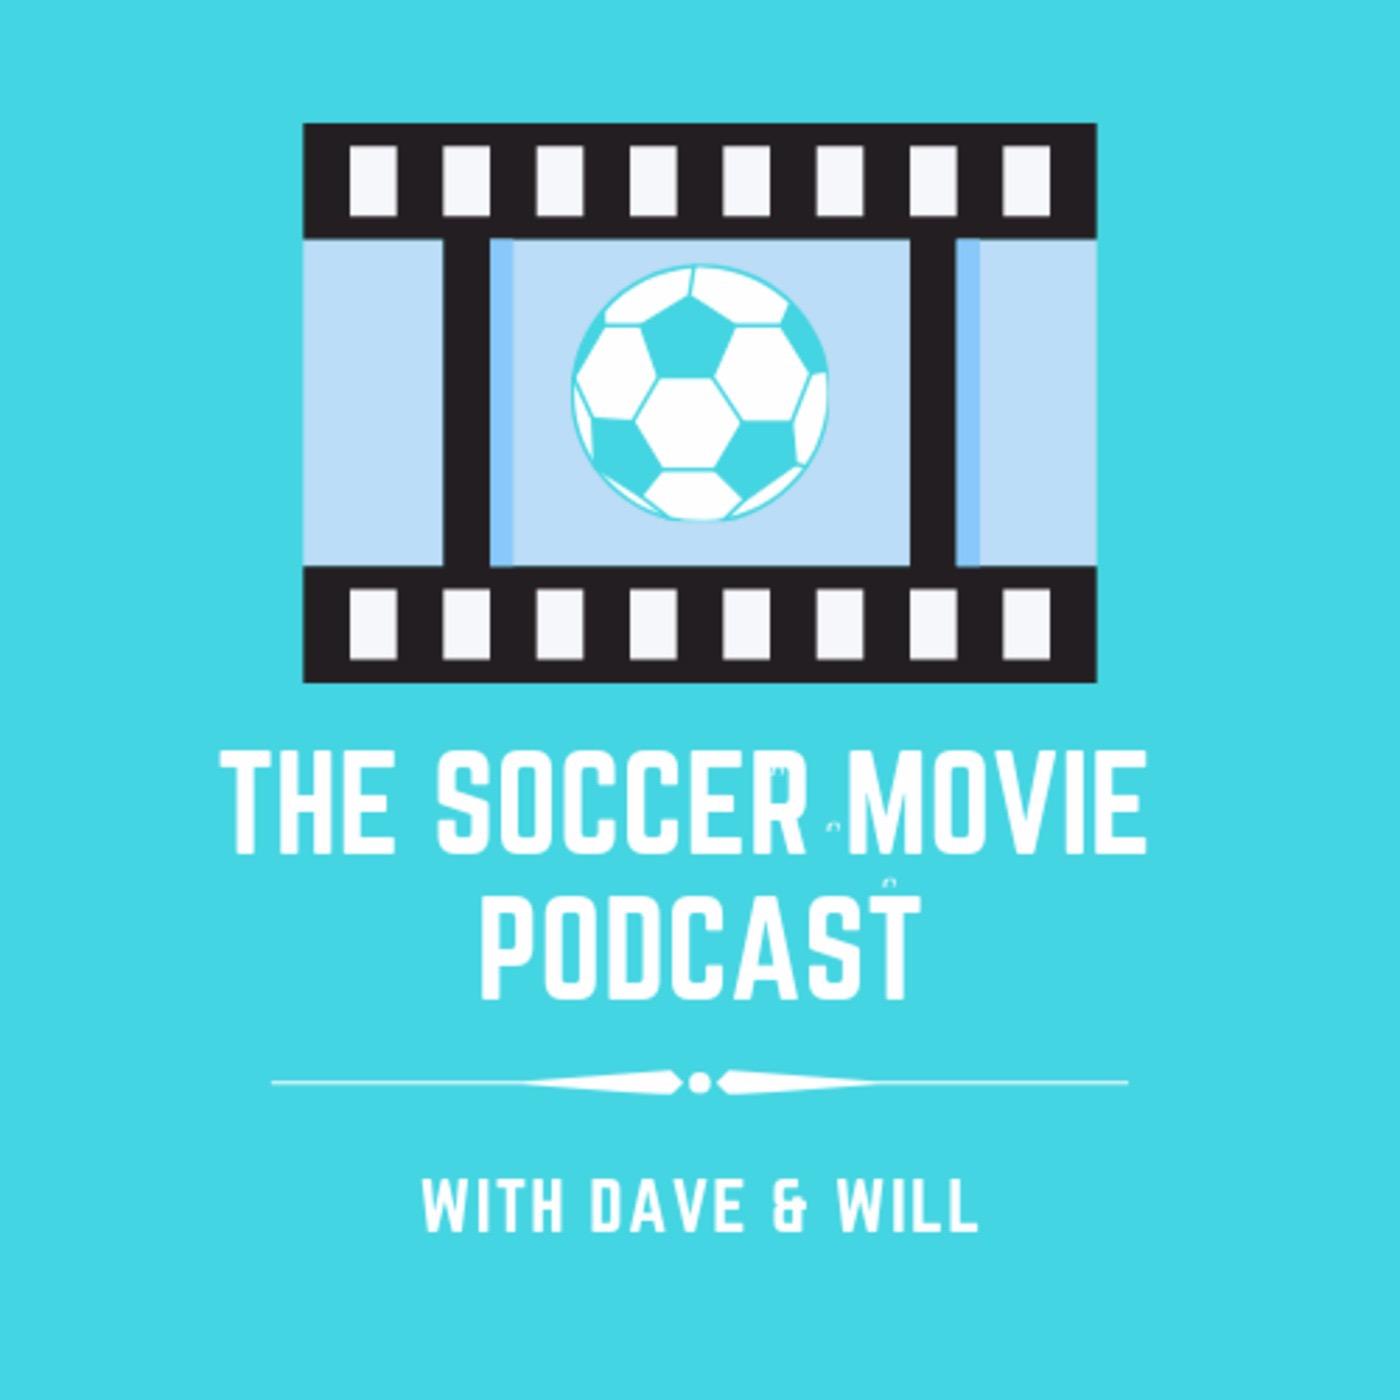 The Soccer Movie Podcast with Dave & Will